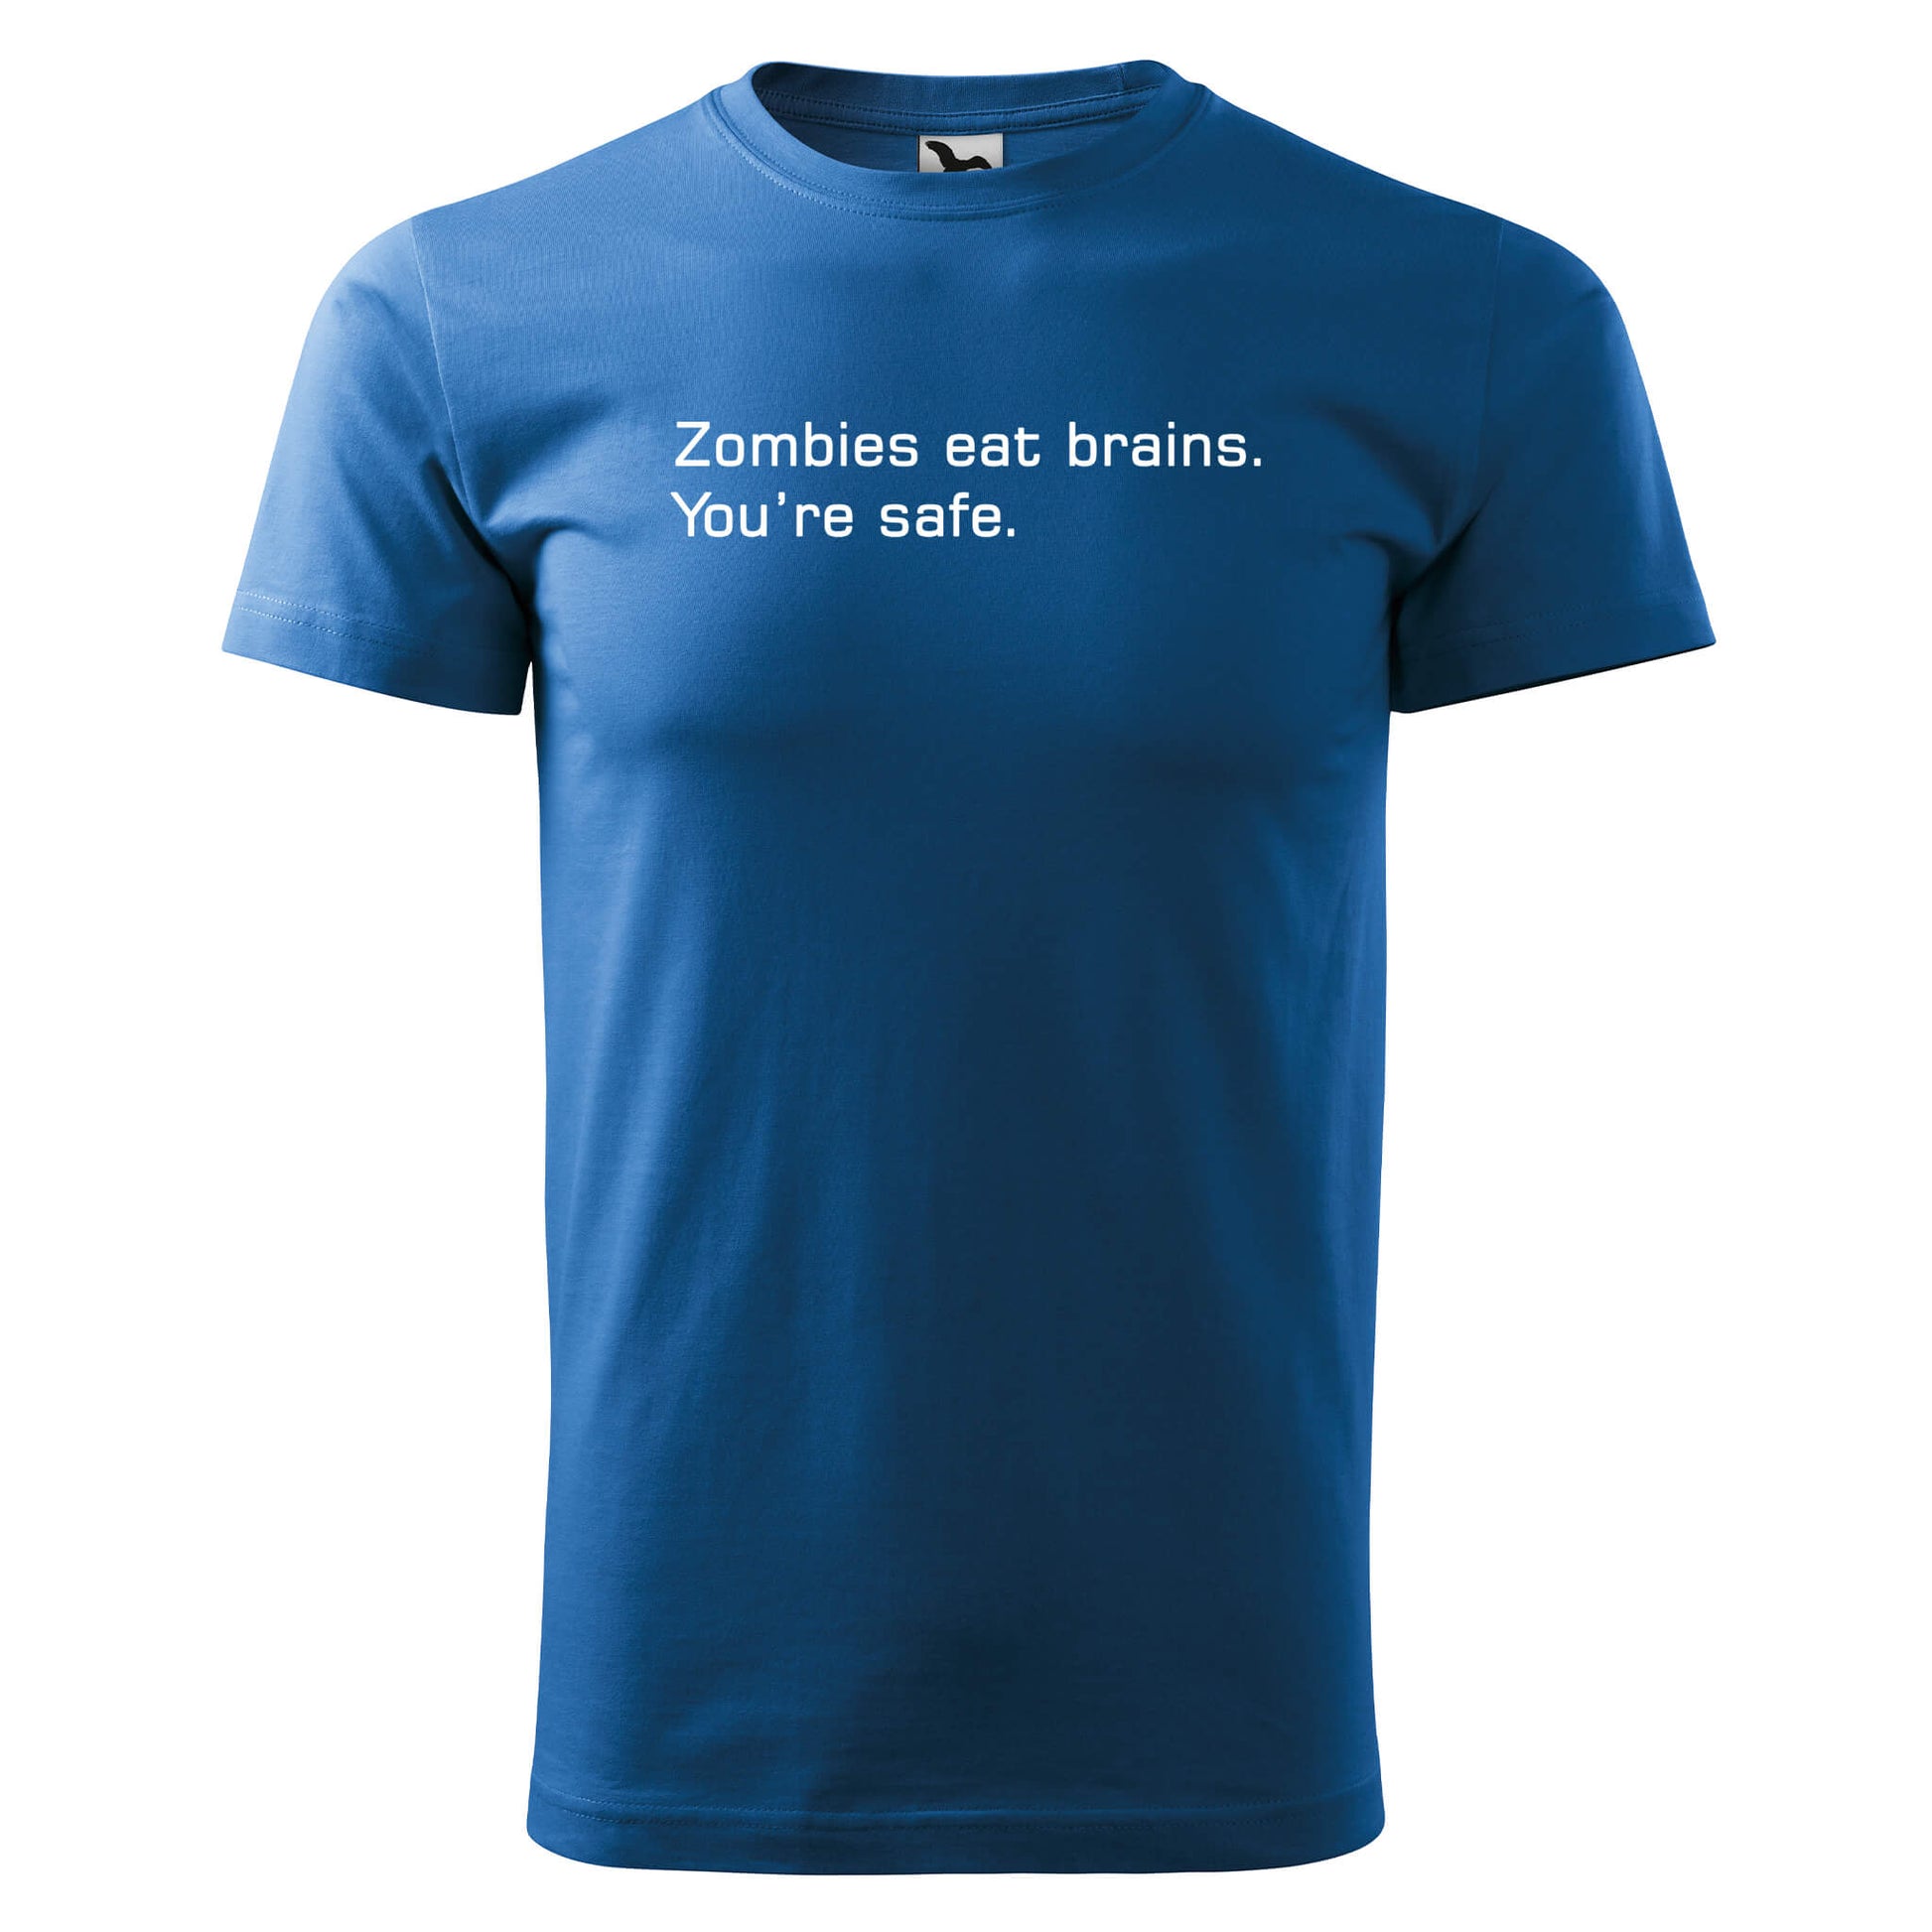 T-shirt - Zombies eat brains. You are safe. - rvdesignprint